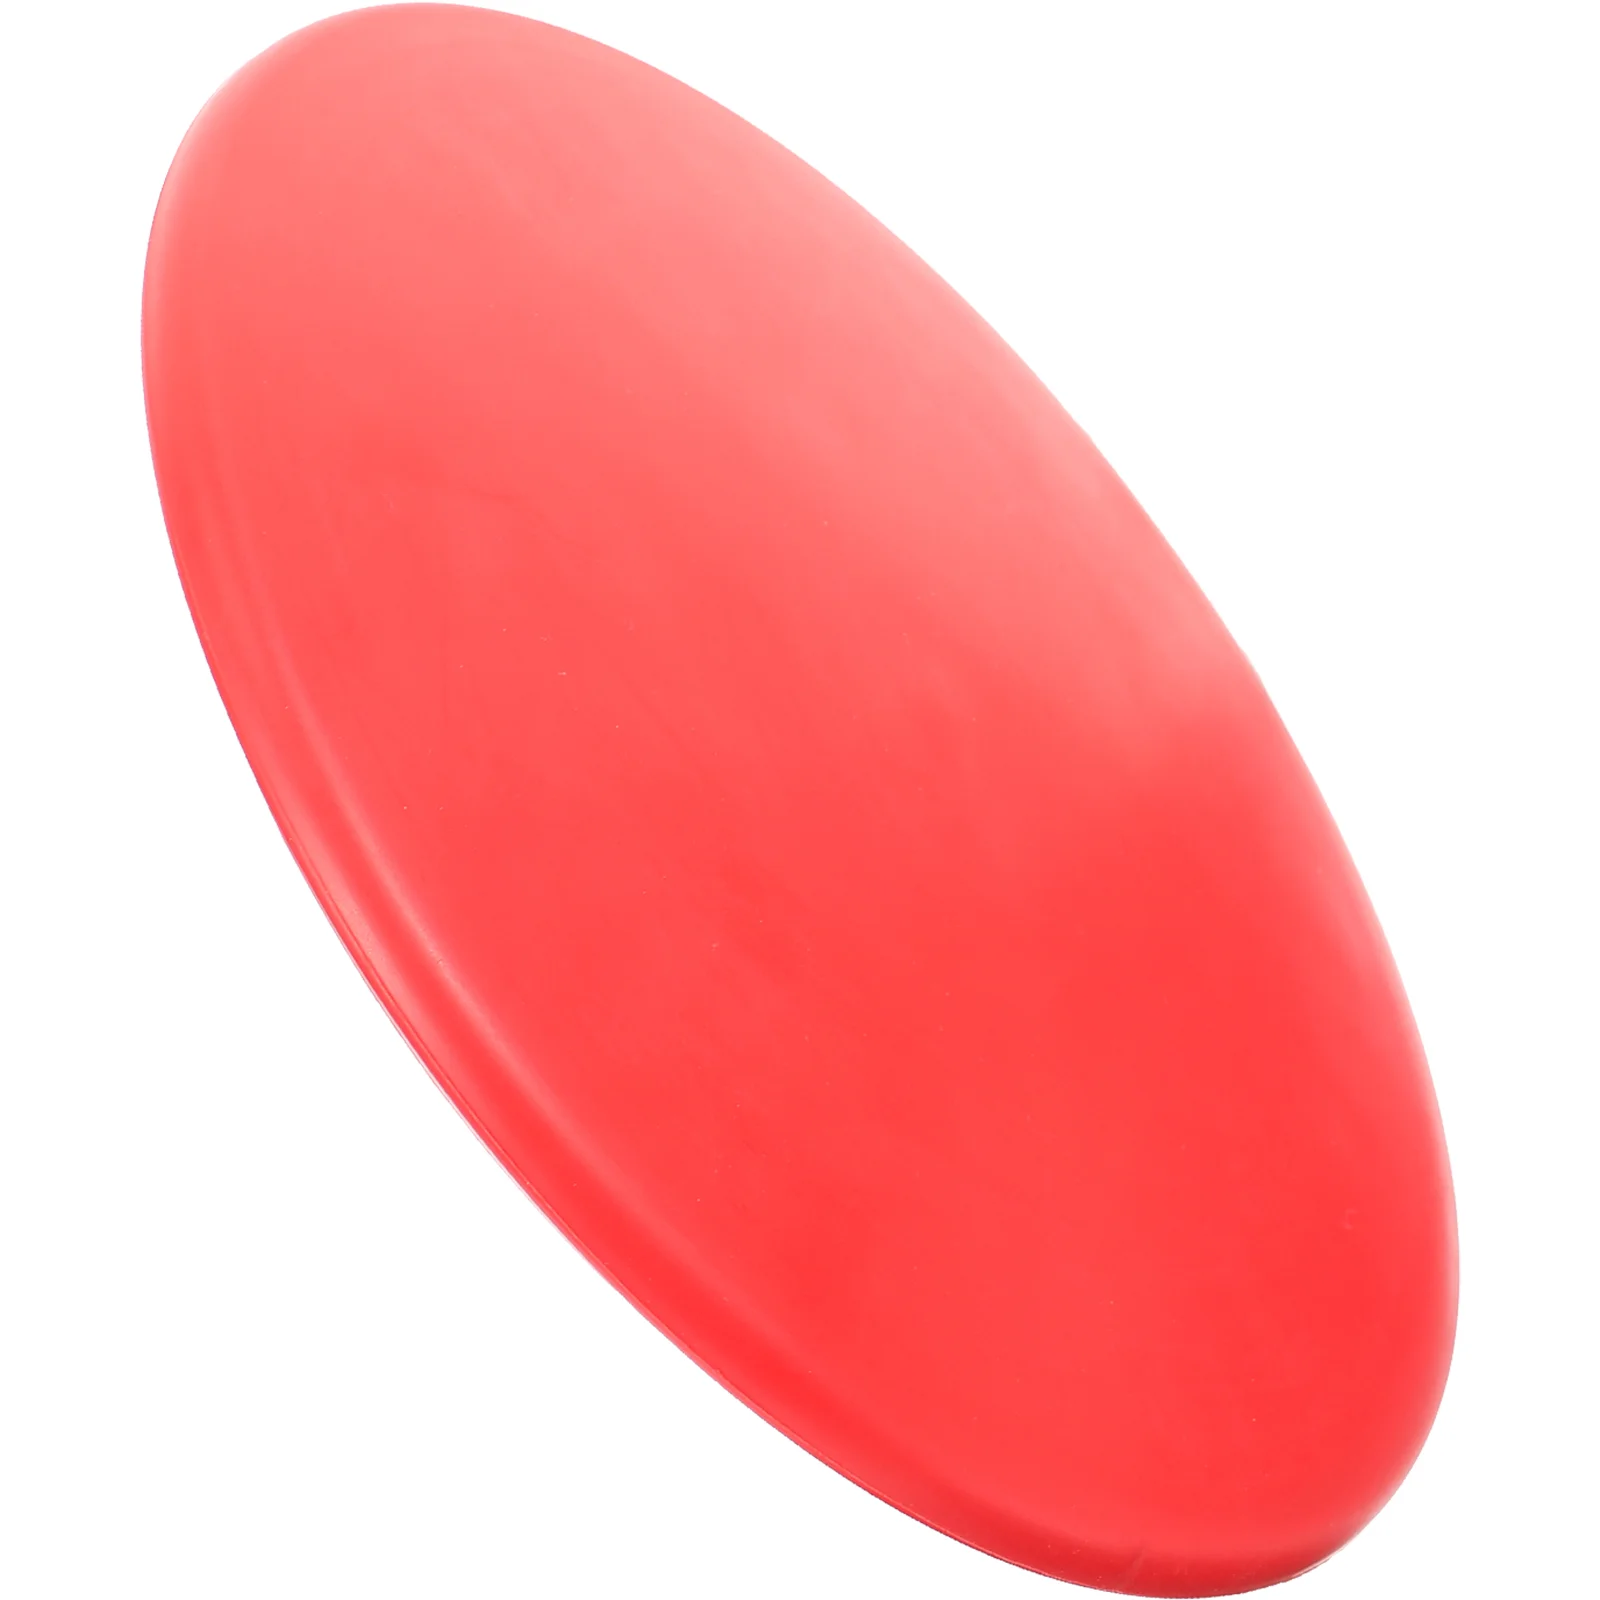 

Outdoor Flying Saucer Mini Tools Pitching Form Trainer Softball Improvement Aid Release Point Mat Training